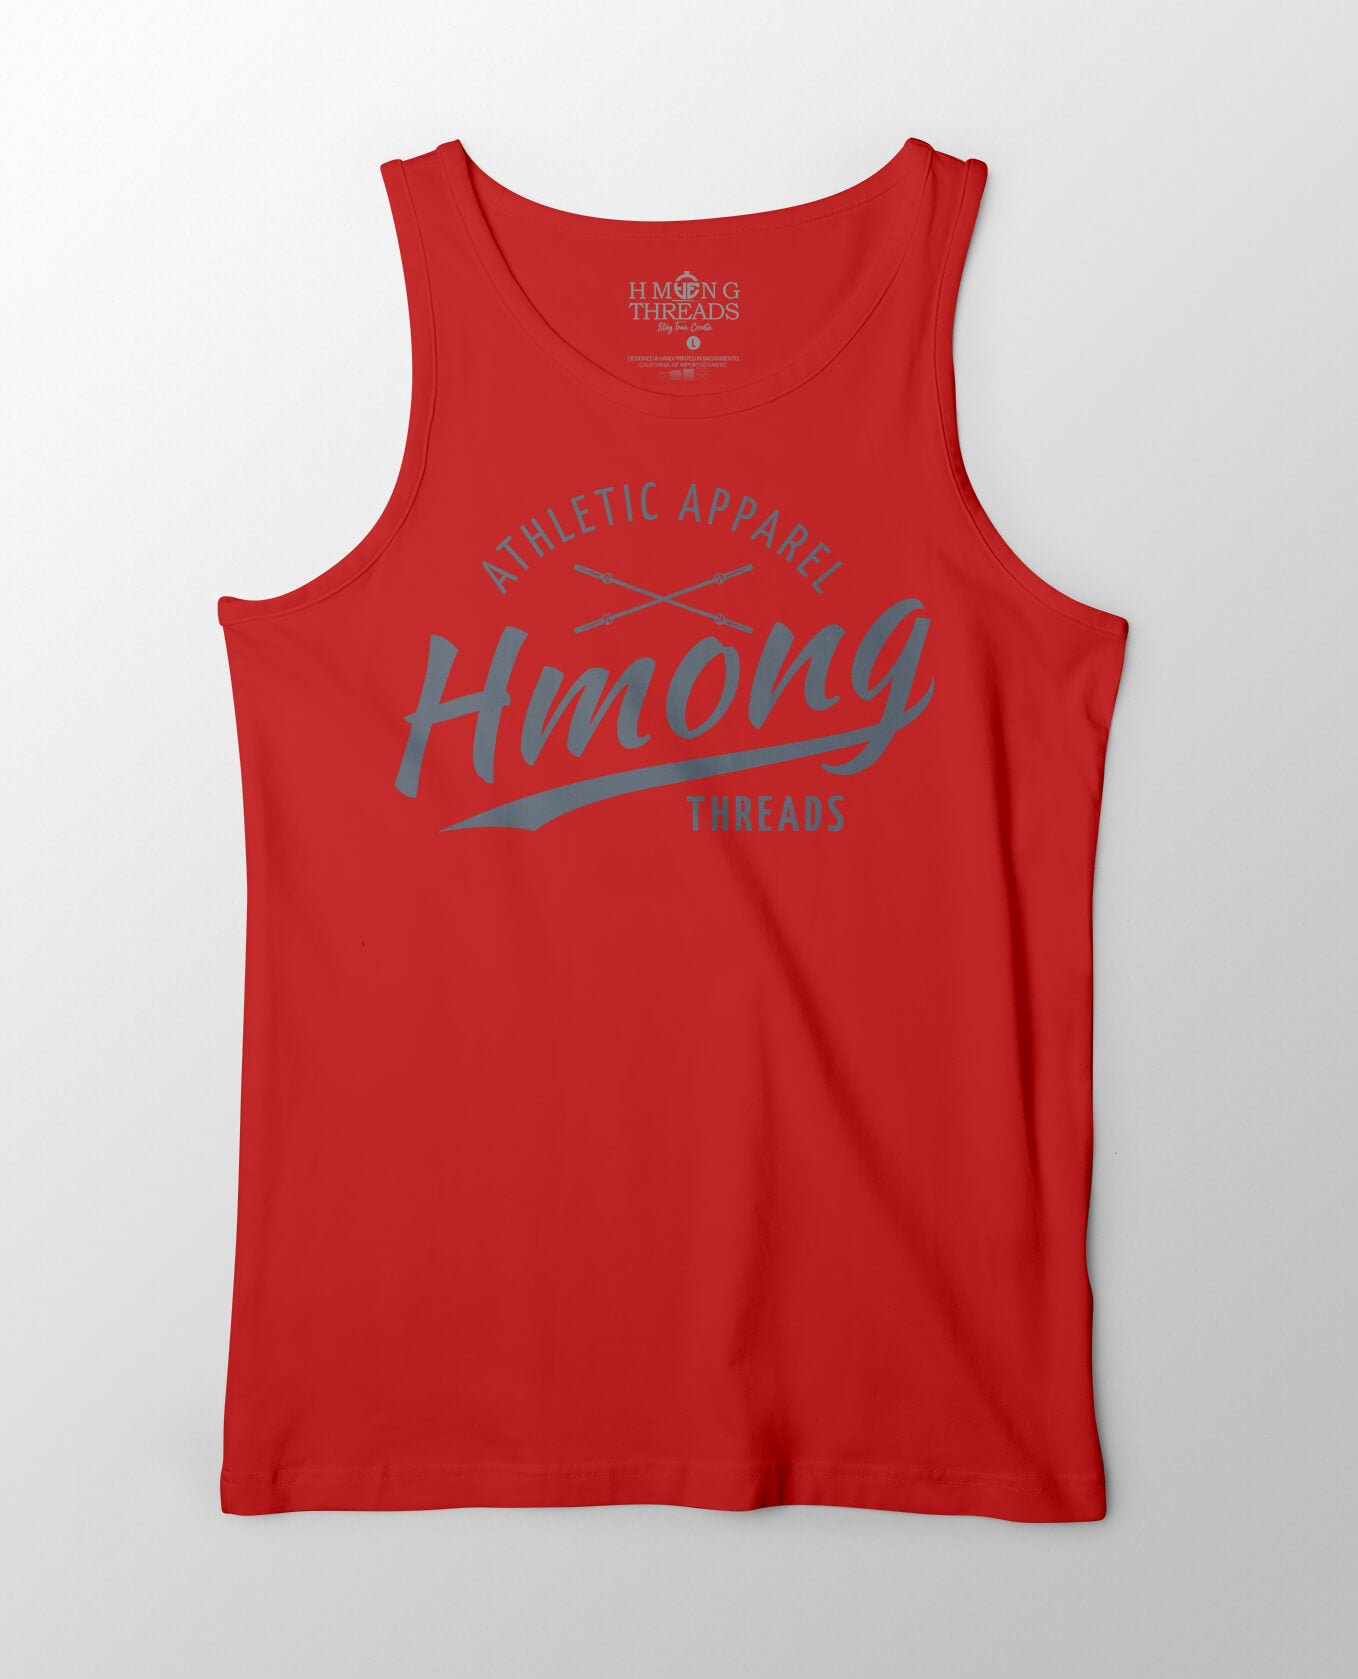 brud Blive ved rysten CLASSIC HMONG THREADS ATHLETIC APPAREL RED TANK